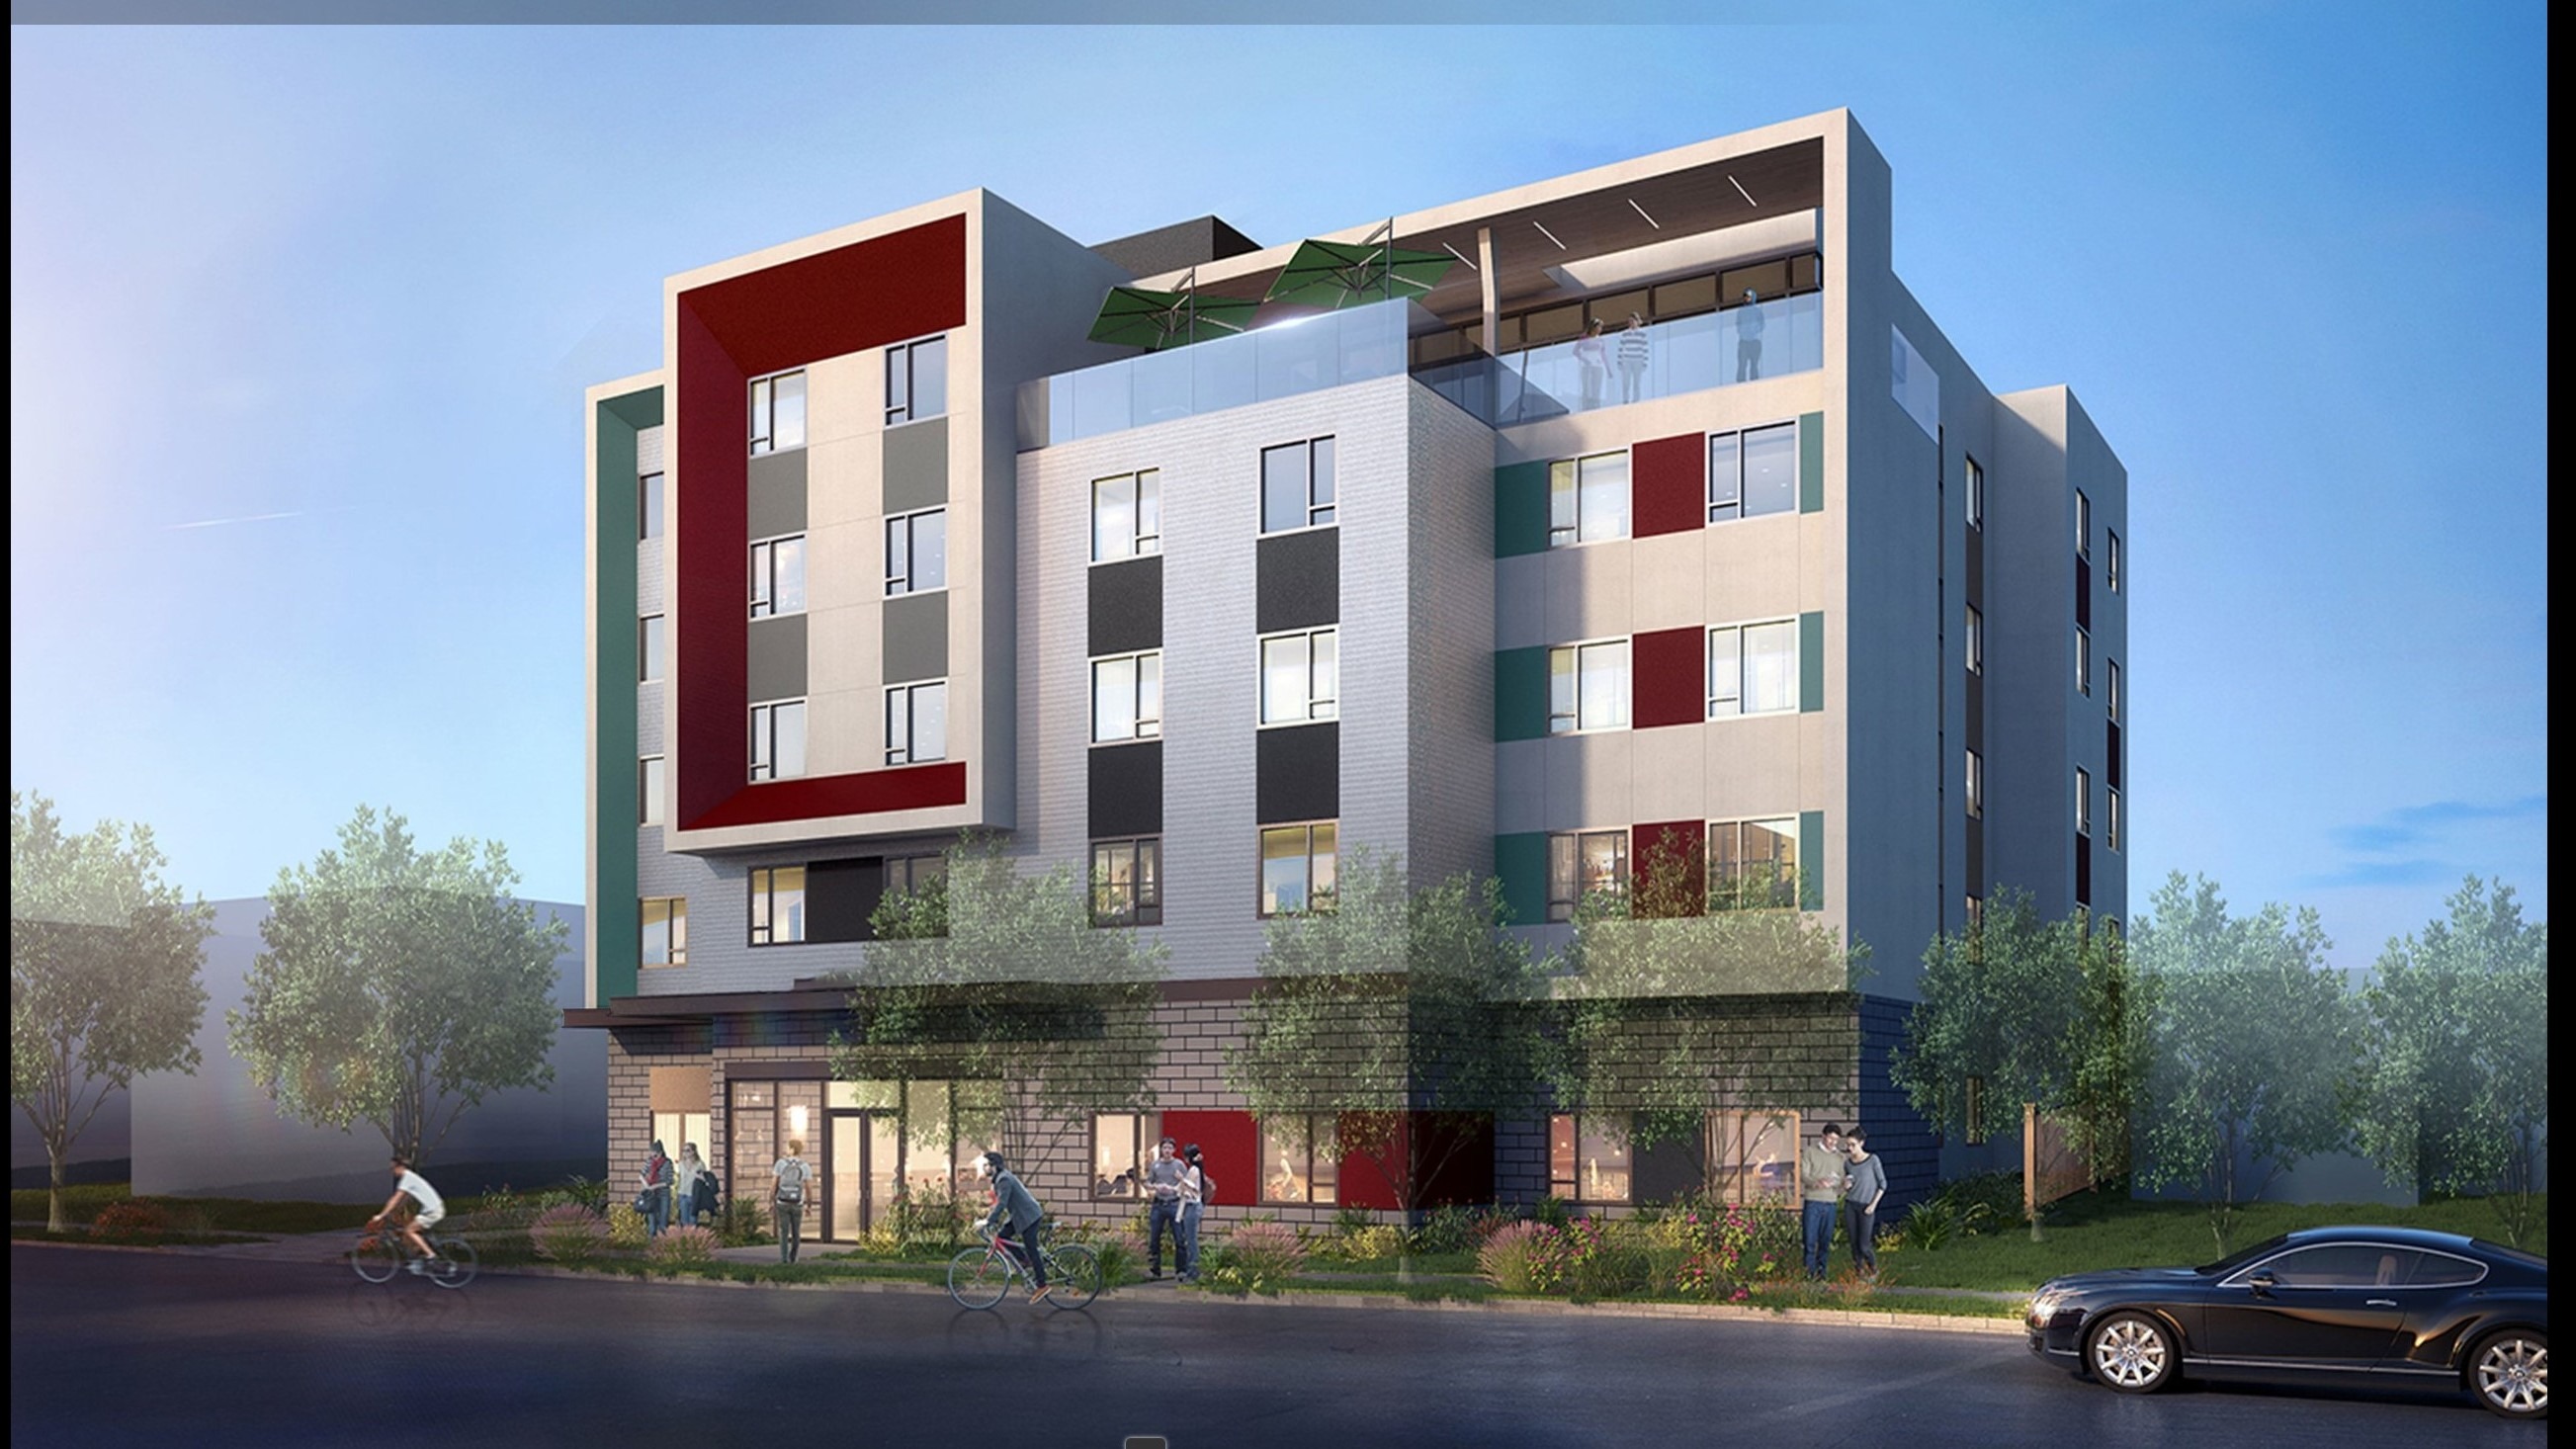 Student Lifestyle Apartments San Diego: See The Latest Design Concepts At SDSU